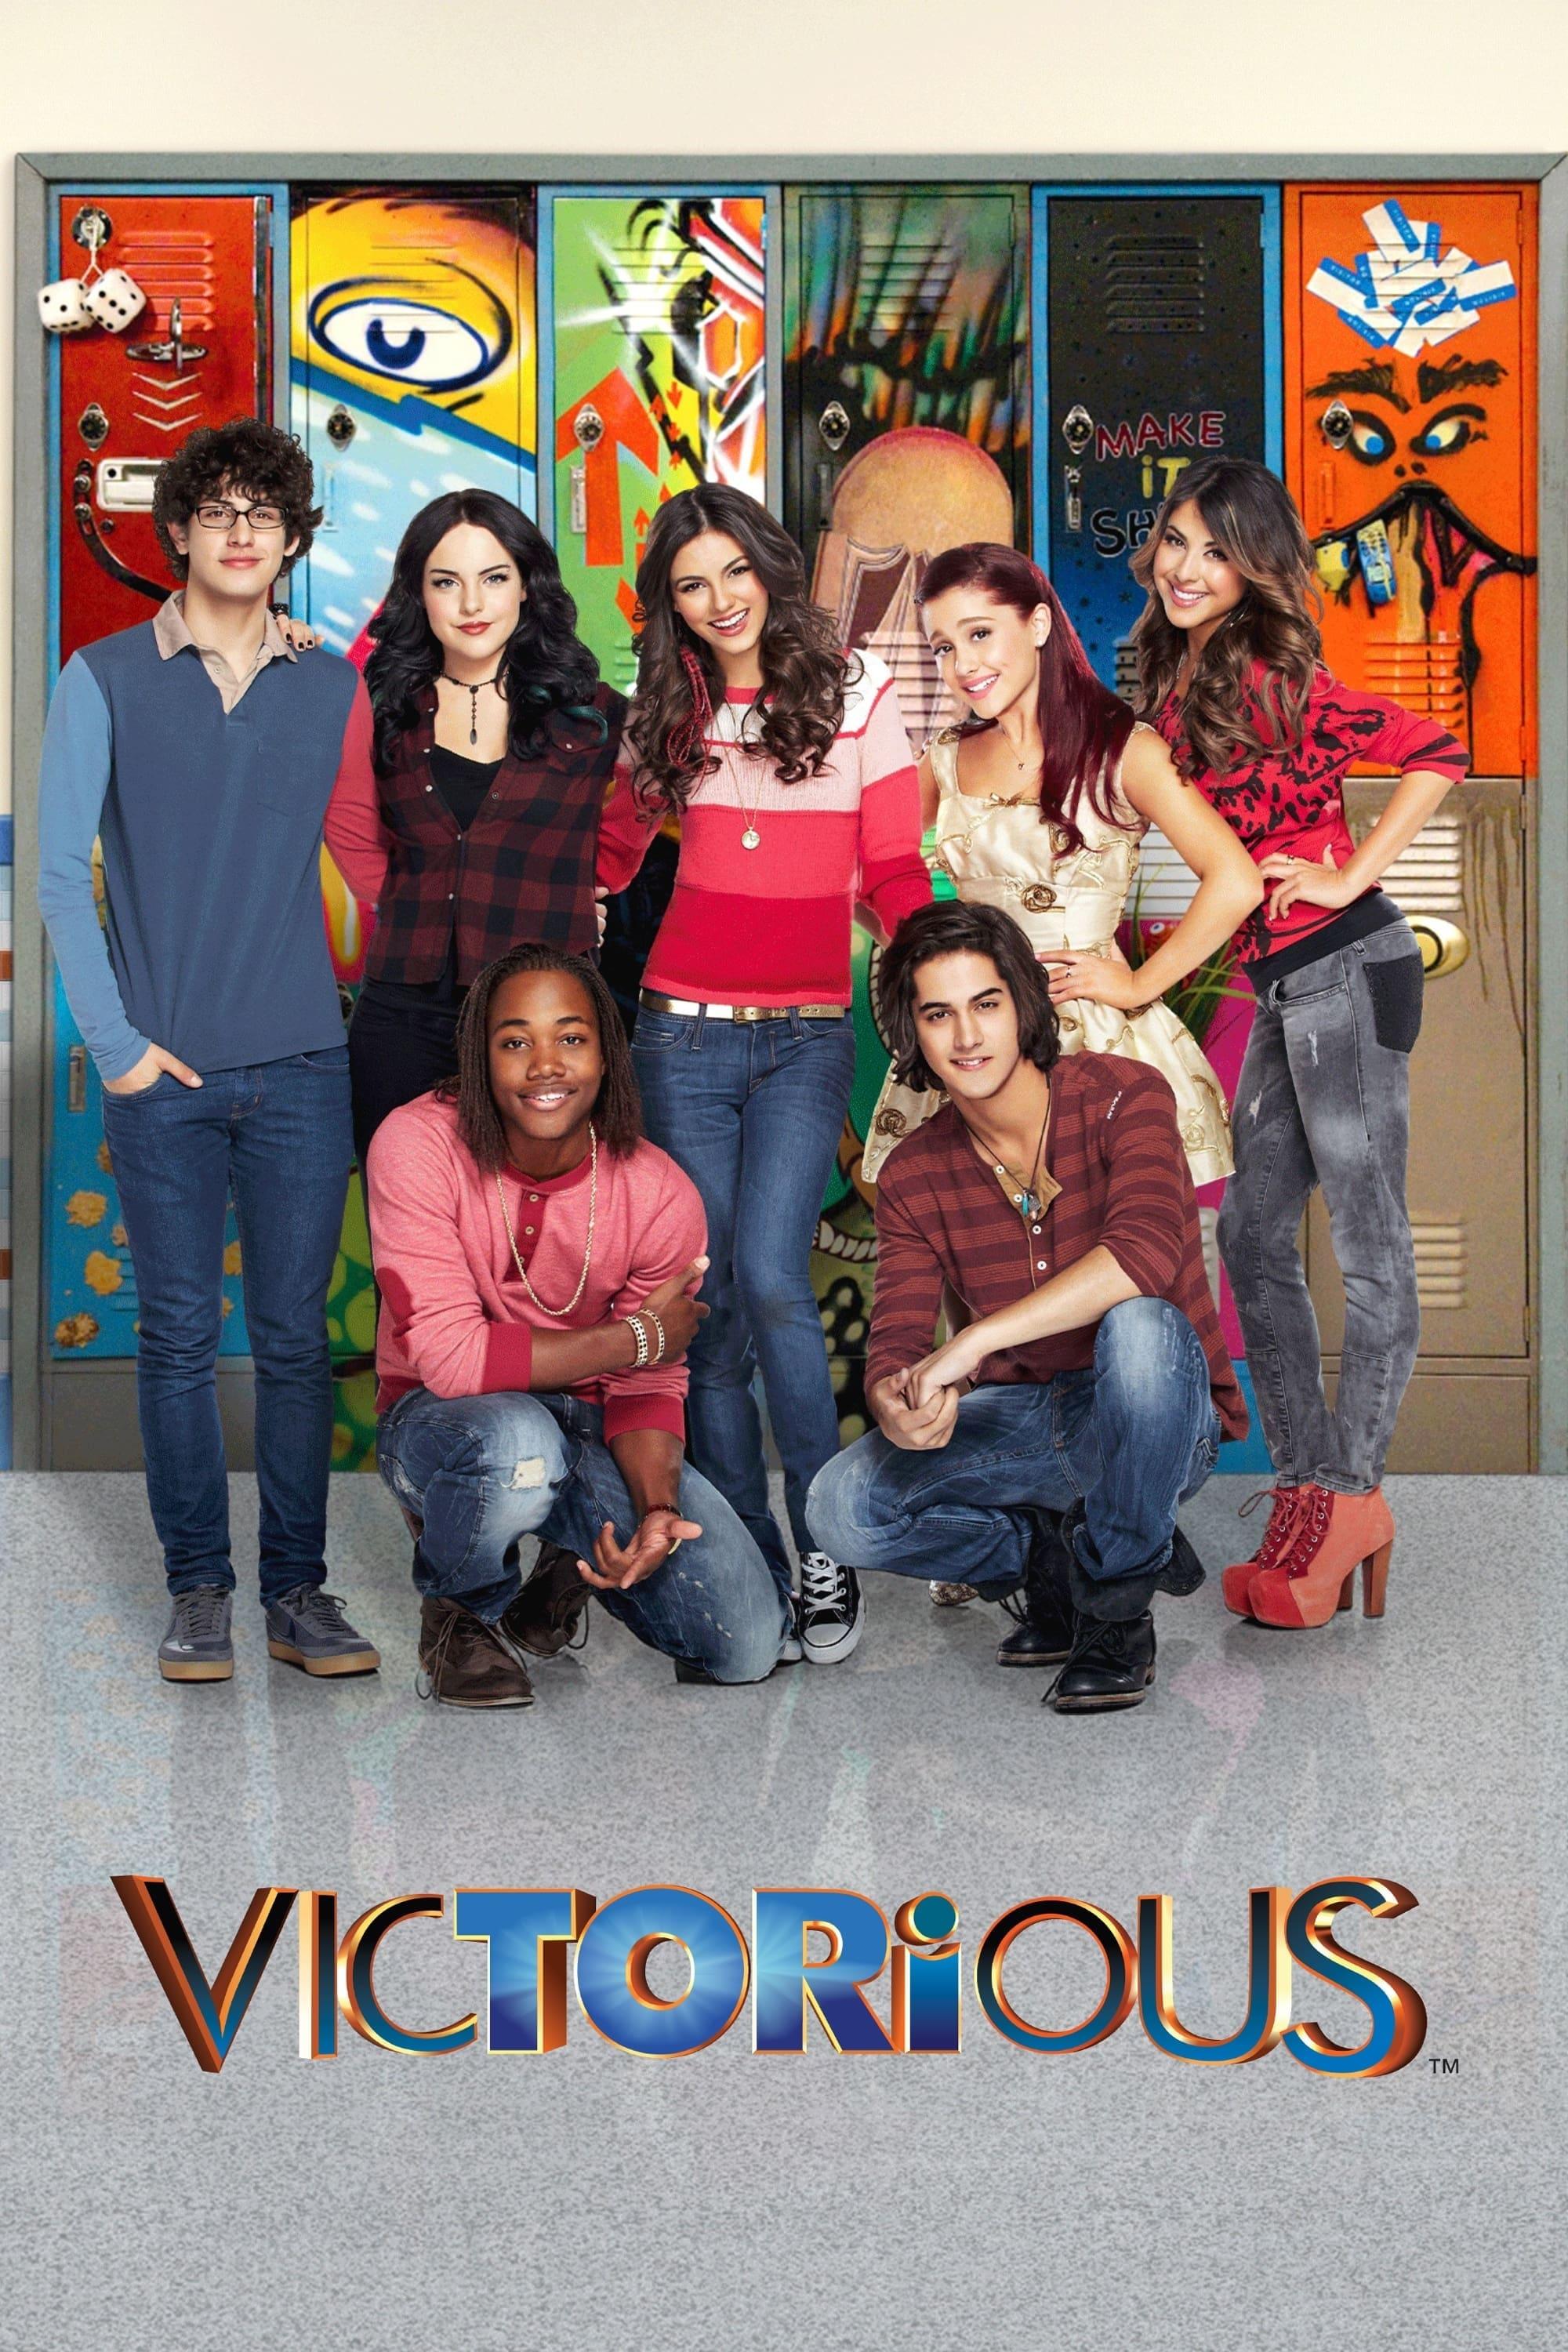 iParty with Victorious poster